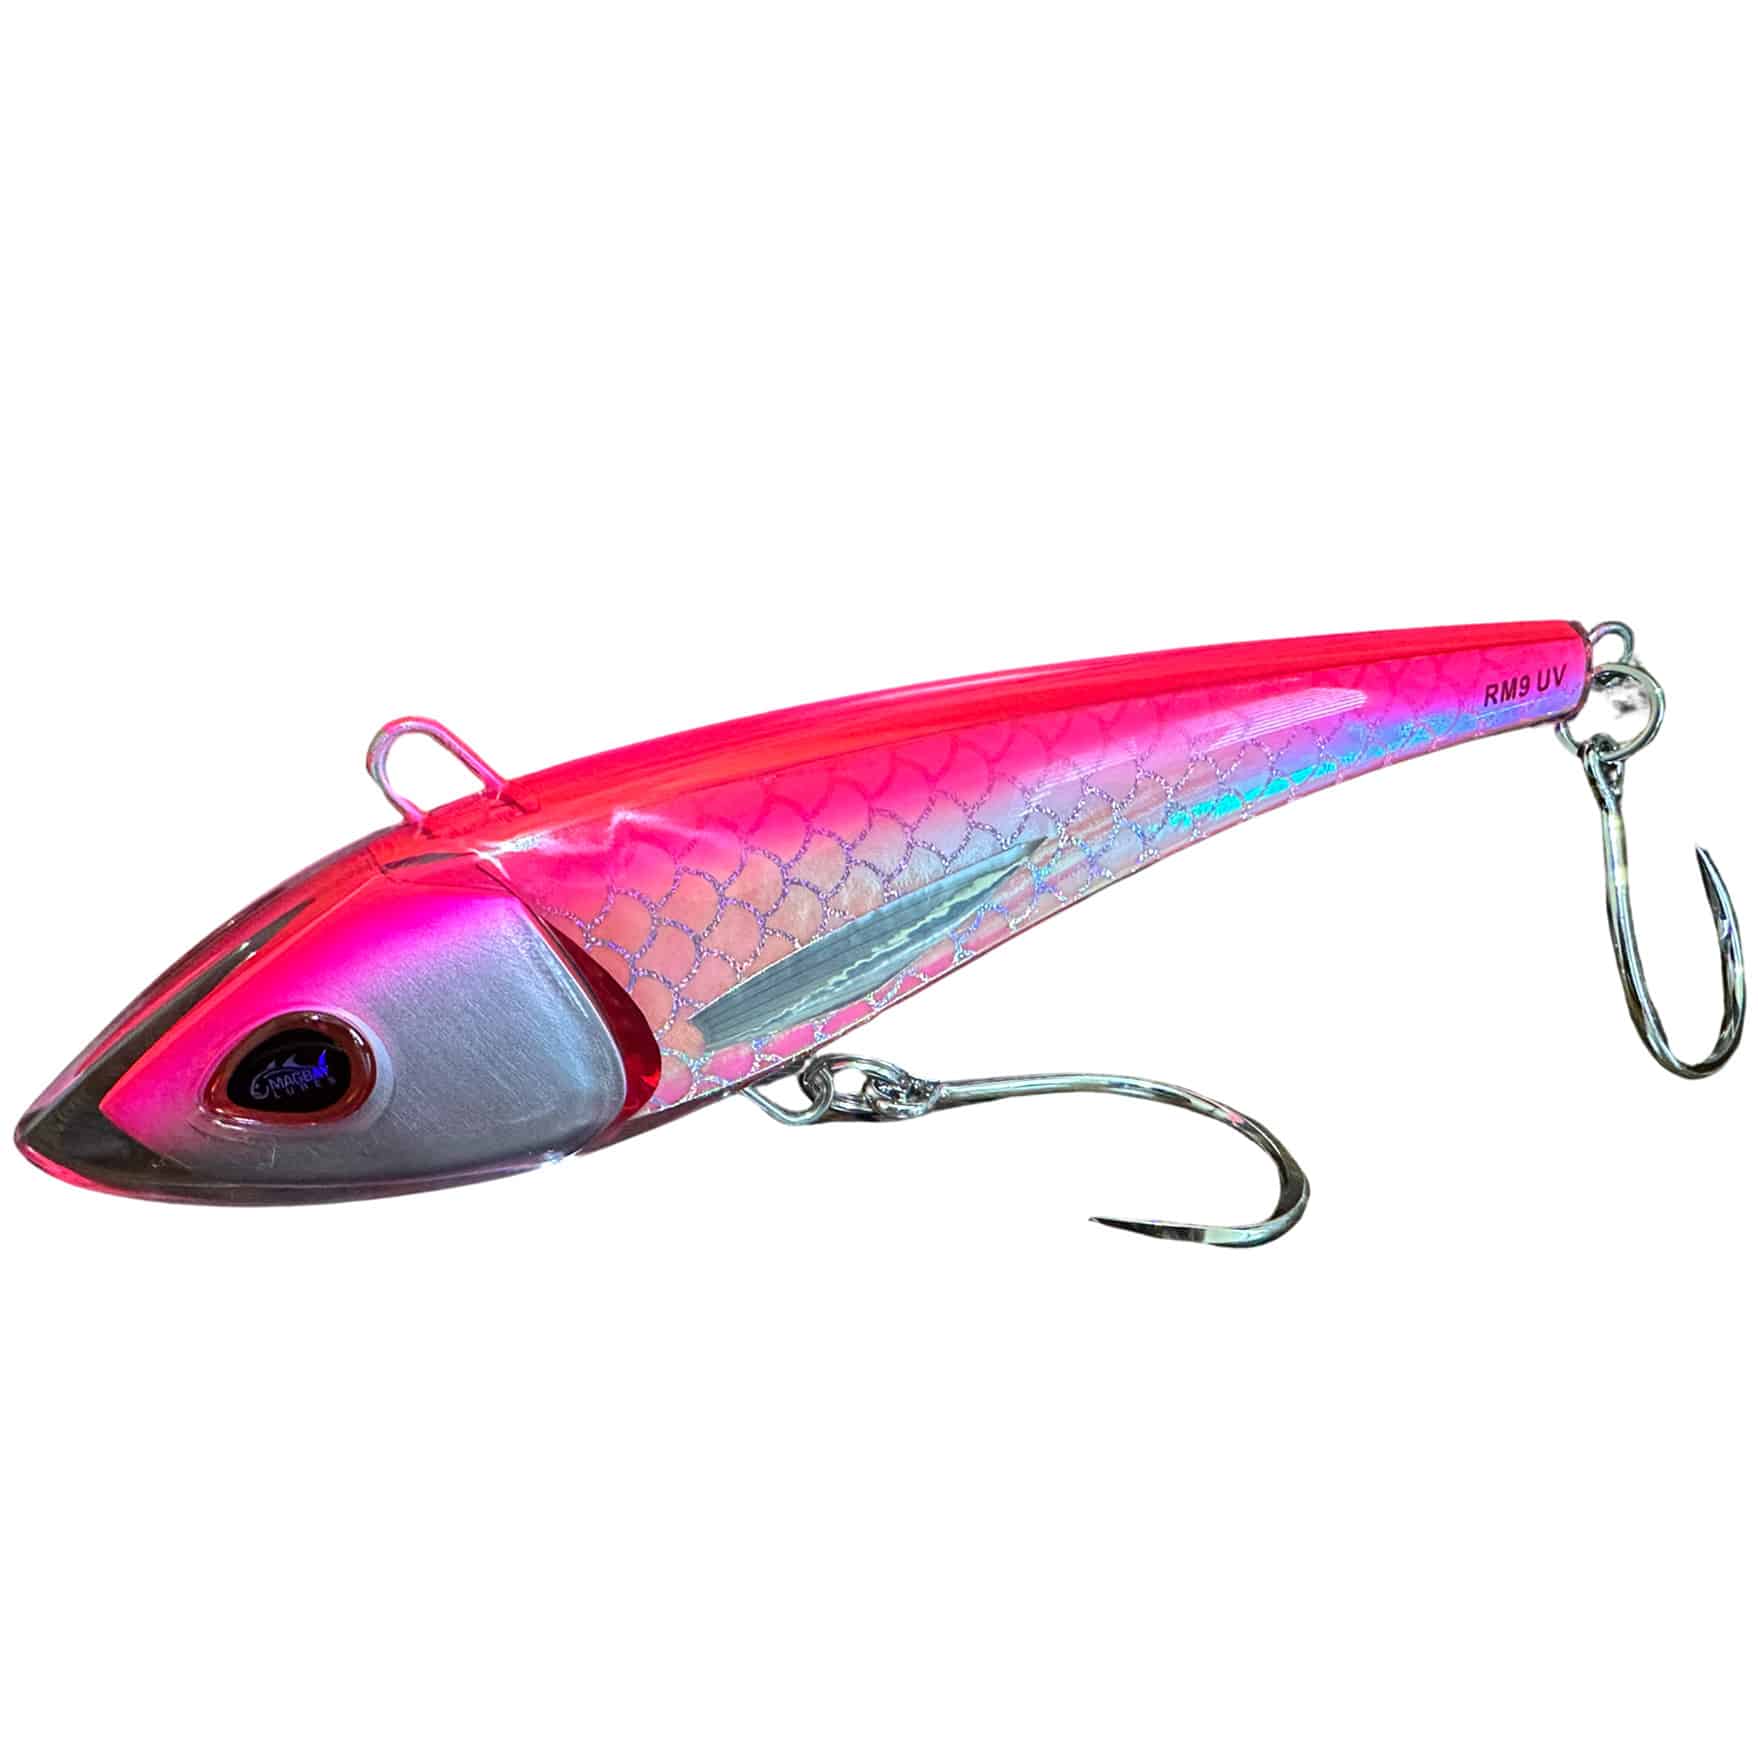 Wholesale American Made Fishing Lure Bodies